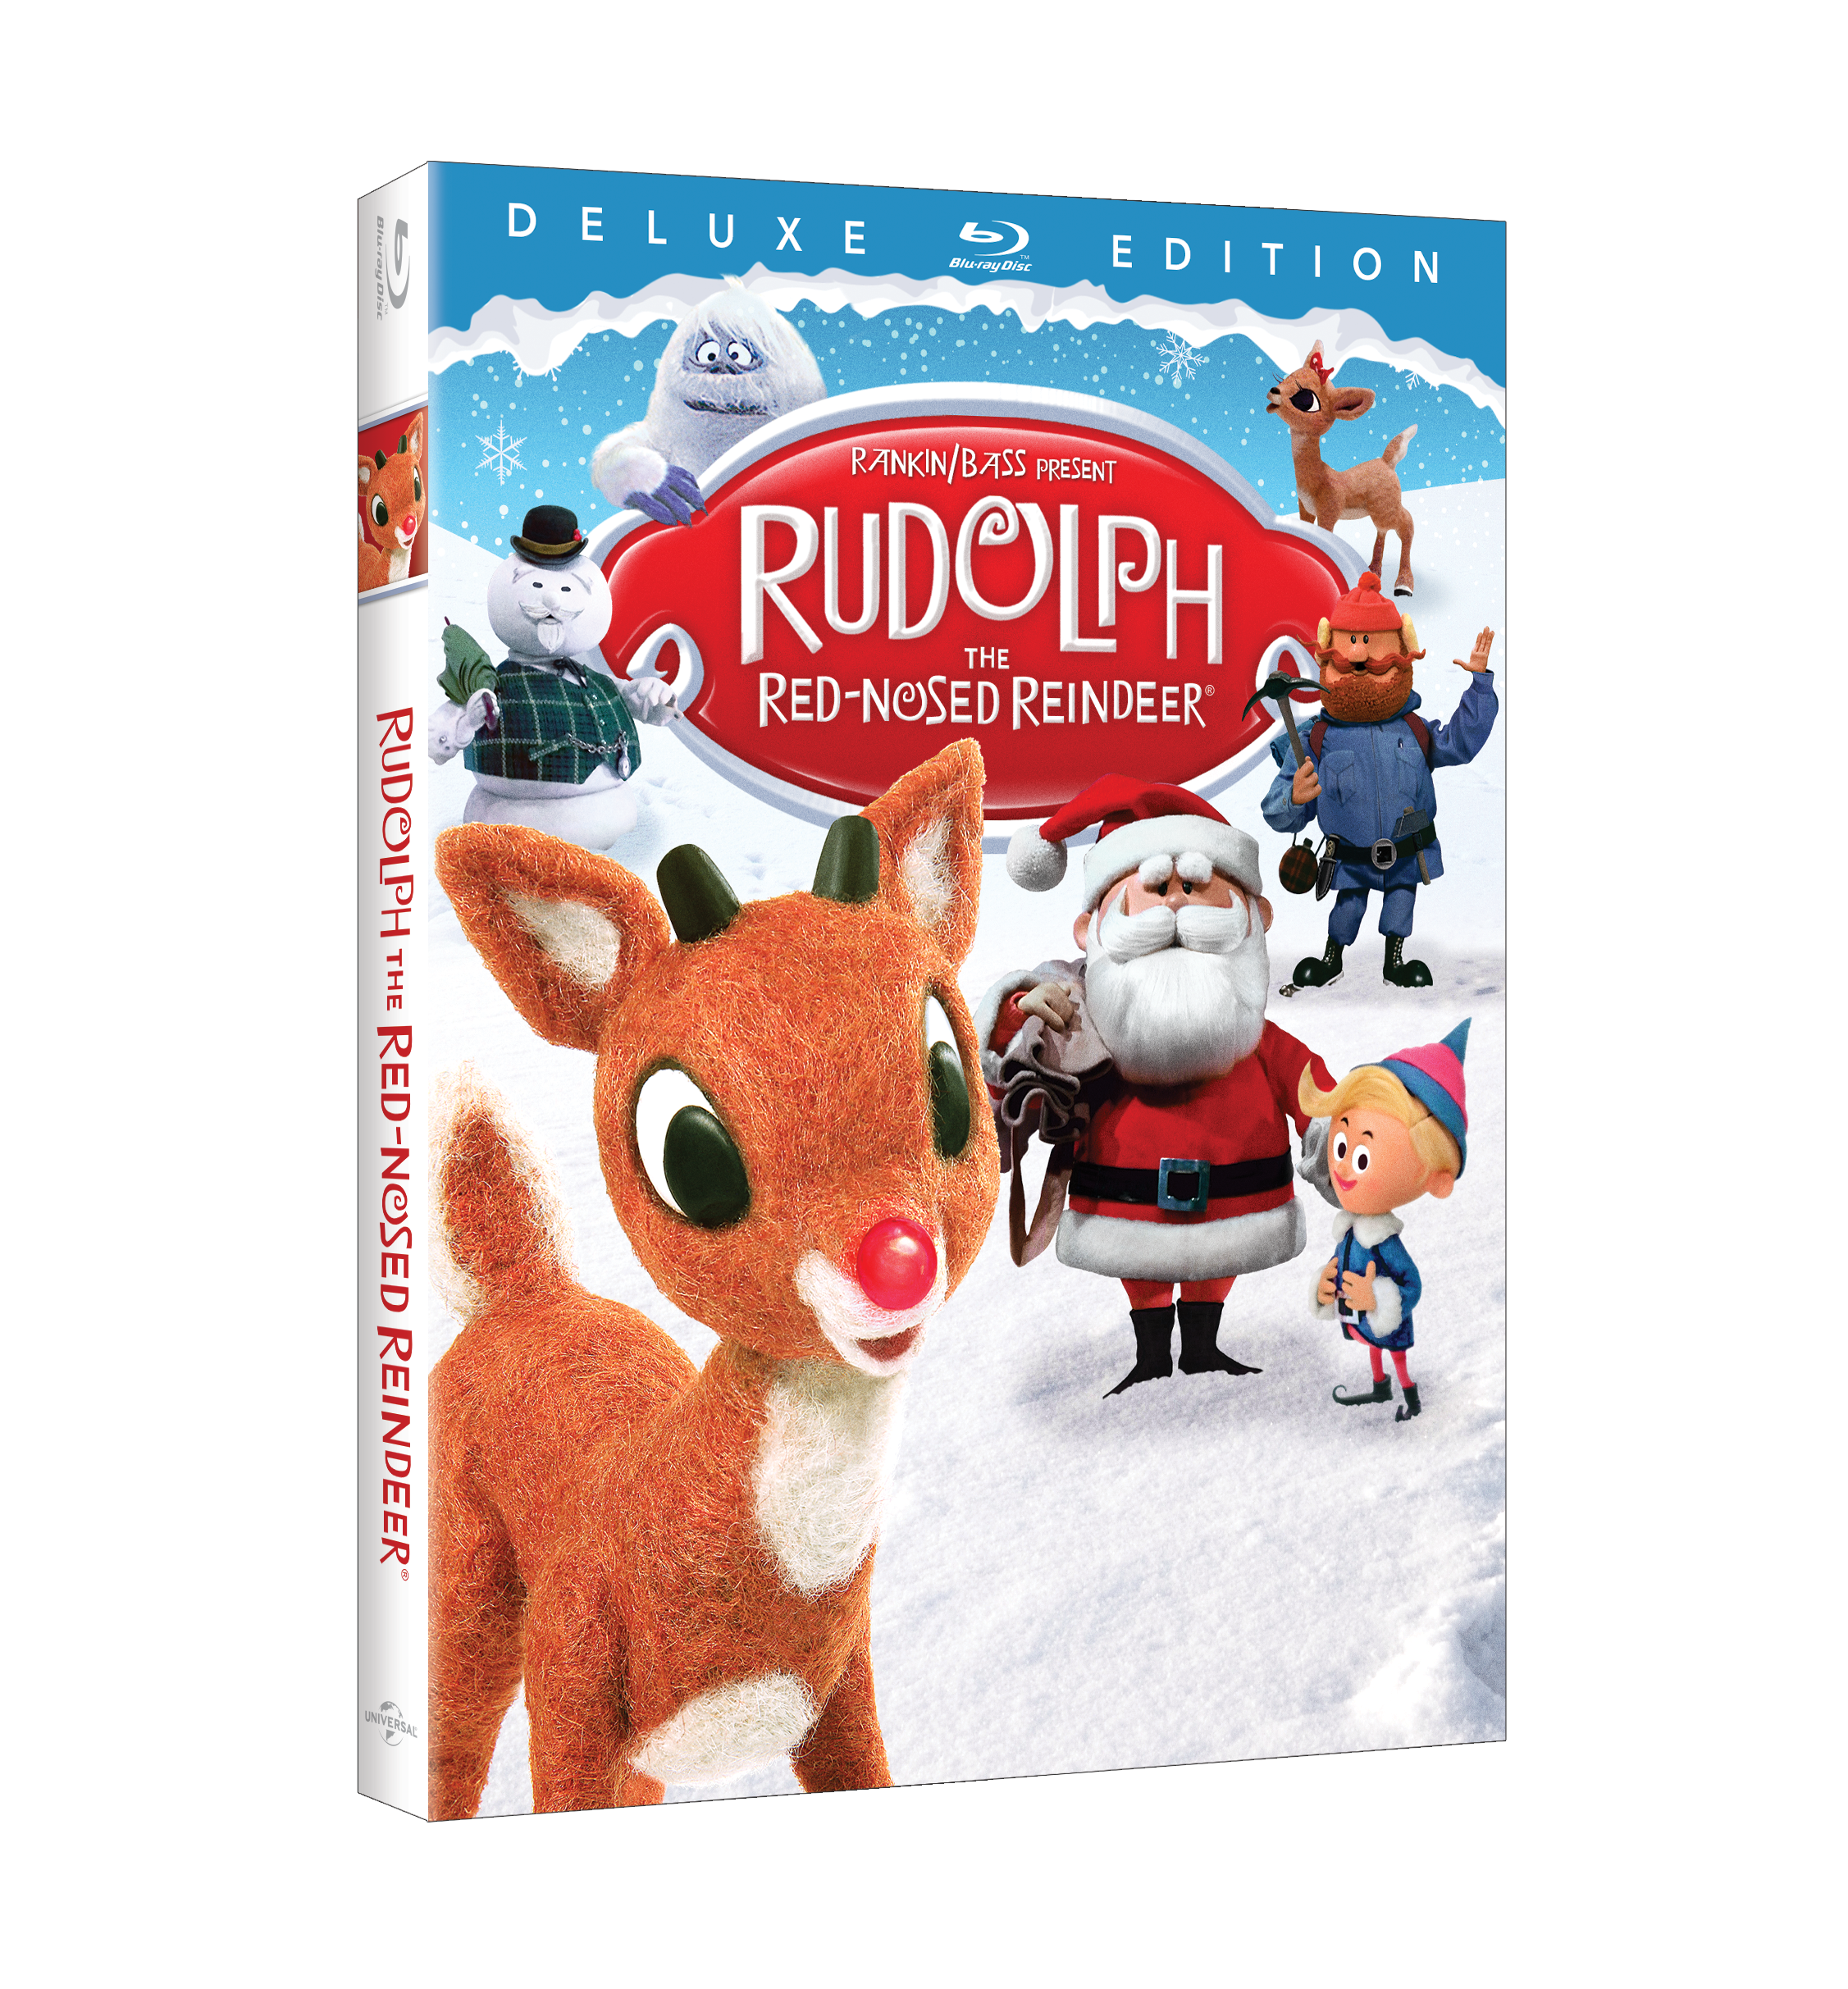 Rudolph The Red-Nosed Reindeer Deluxe Edition Blu-Ray cover (Universal Pictures Home Entertainment)